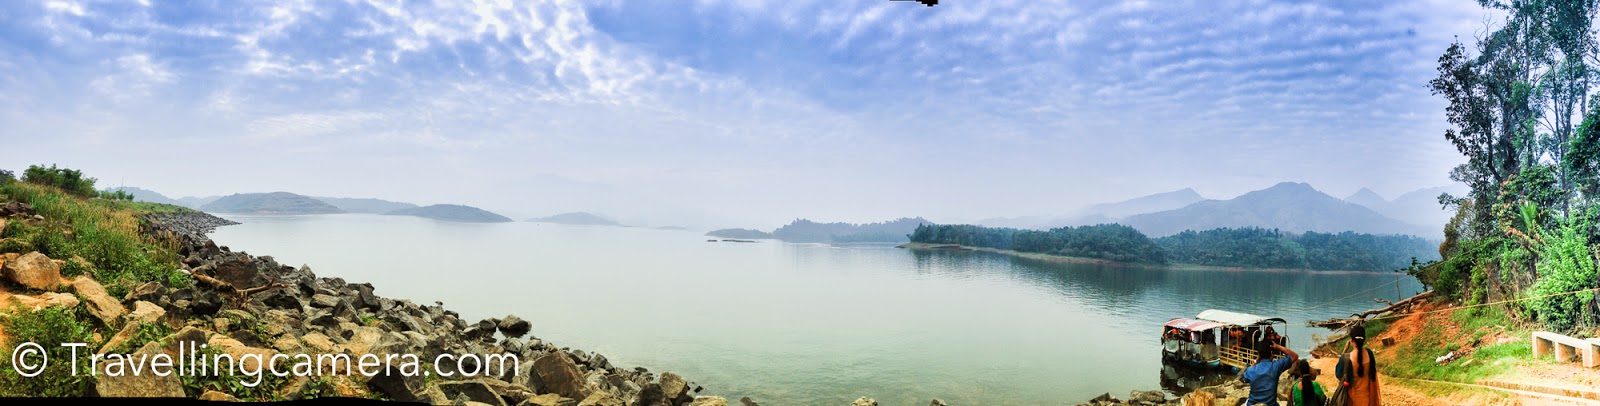 Another view of the place around Banasura sagar dam, from where speedboats take you to the tour of this lake.